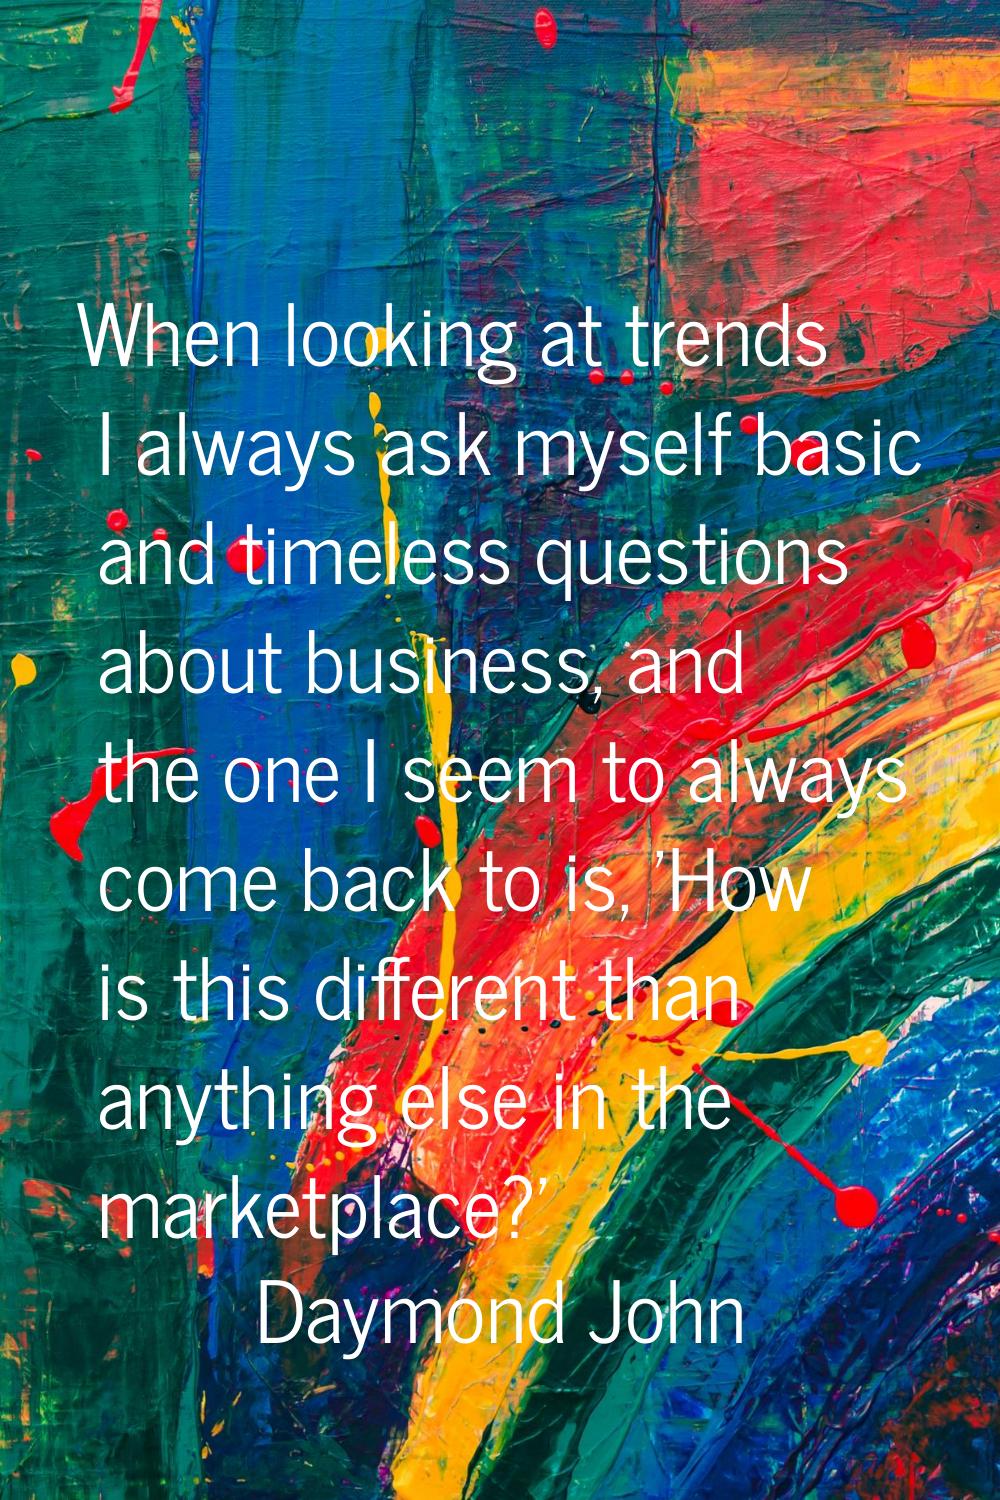 When looking at trends I always ask myself basic and timeless questions about business, and the one